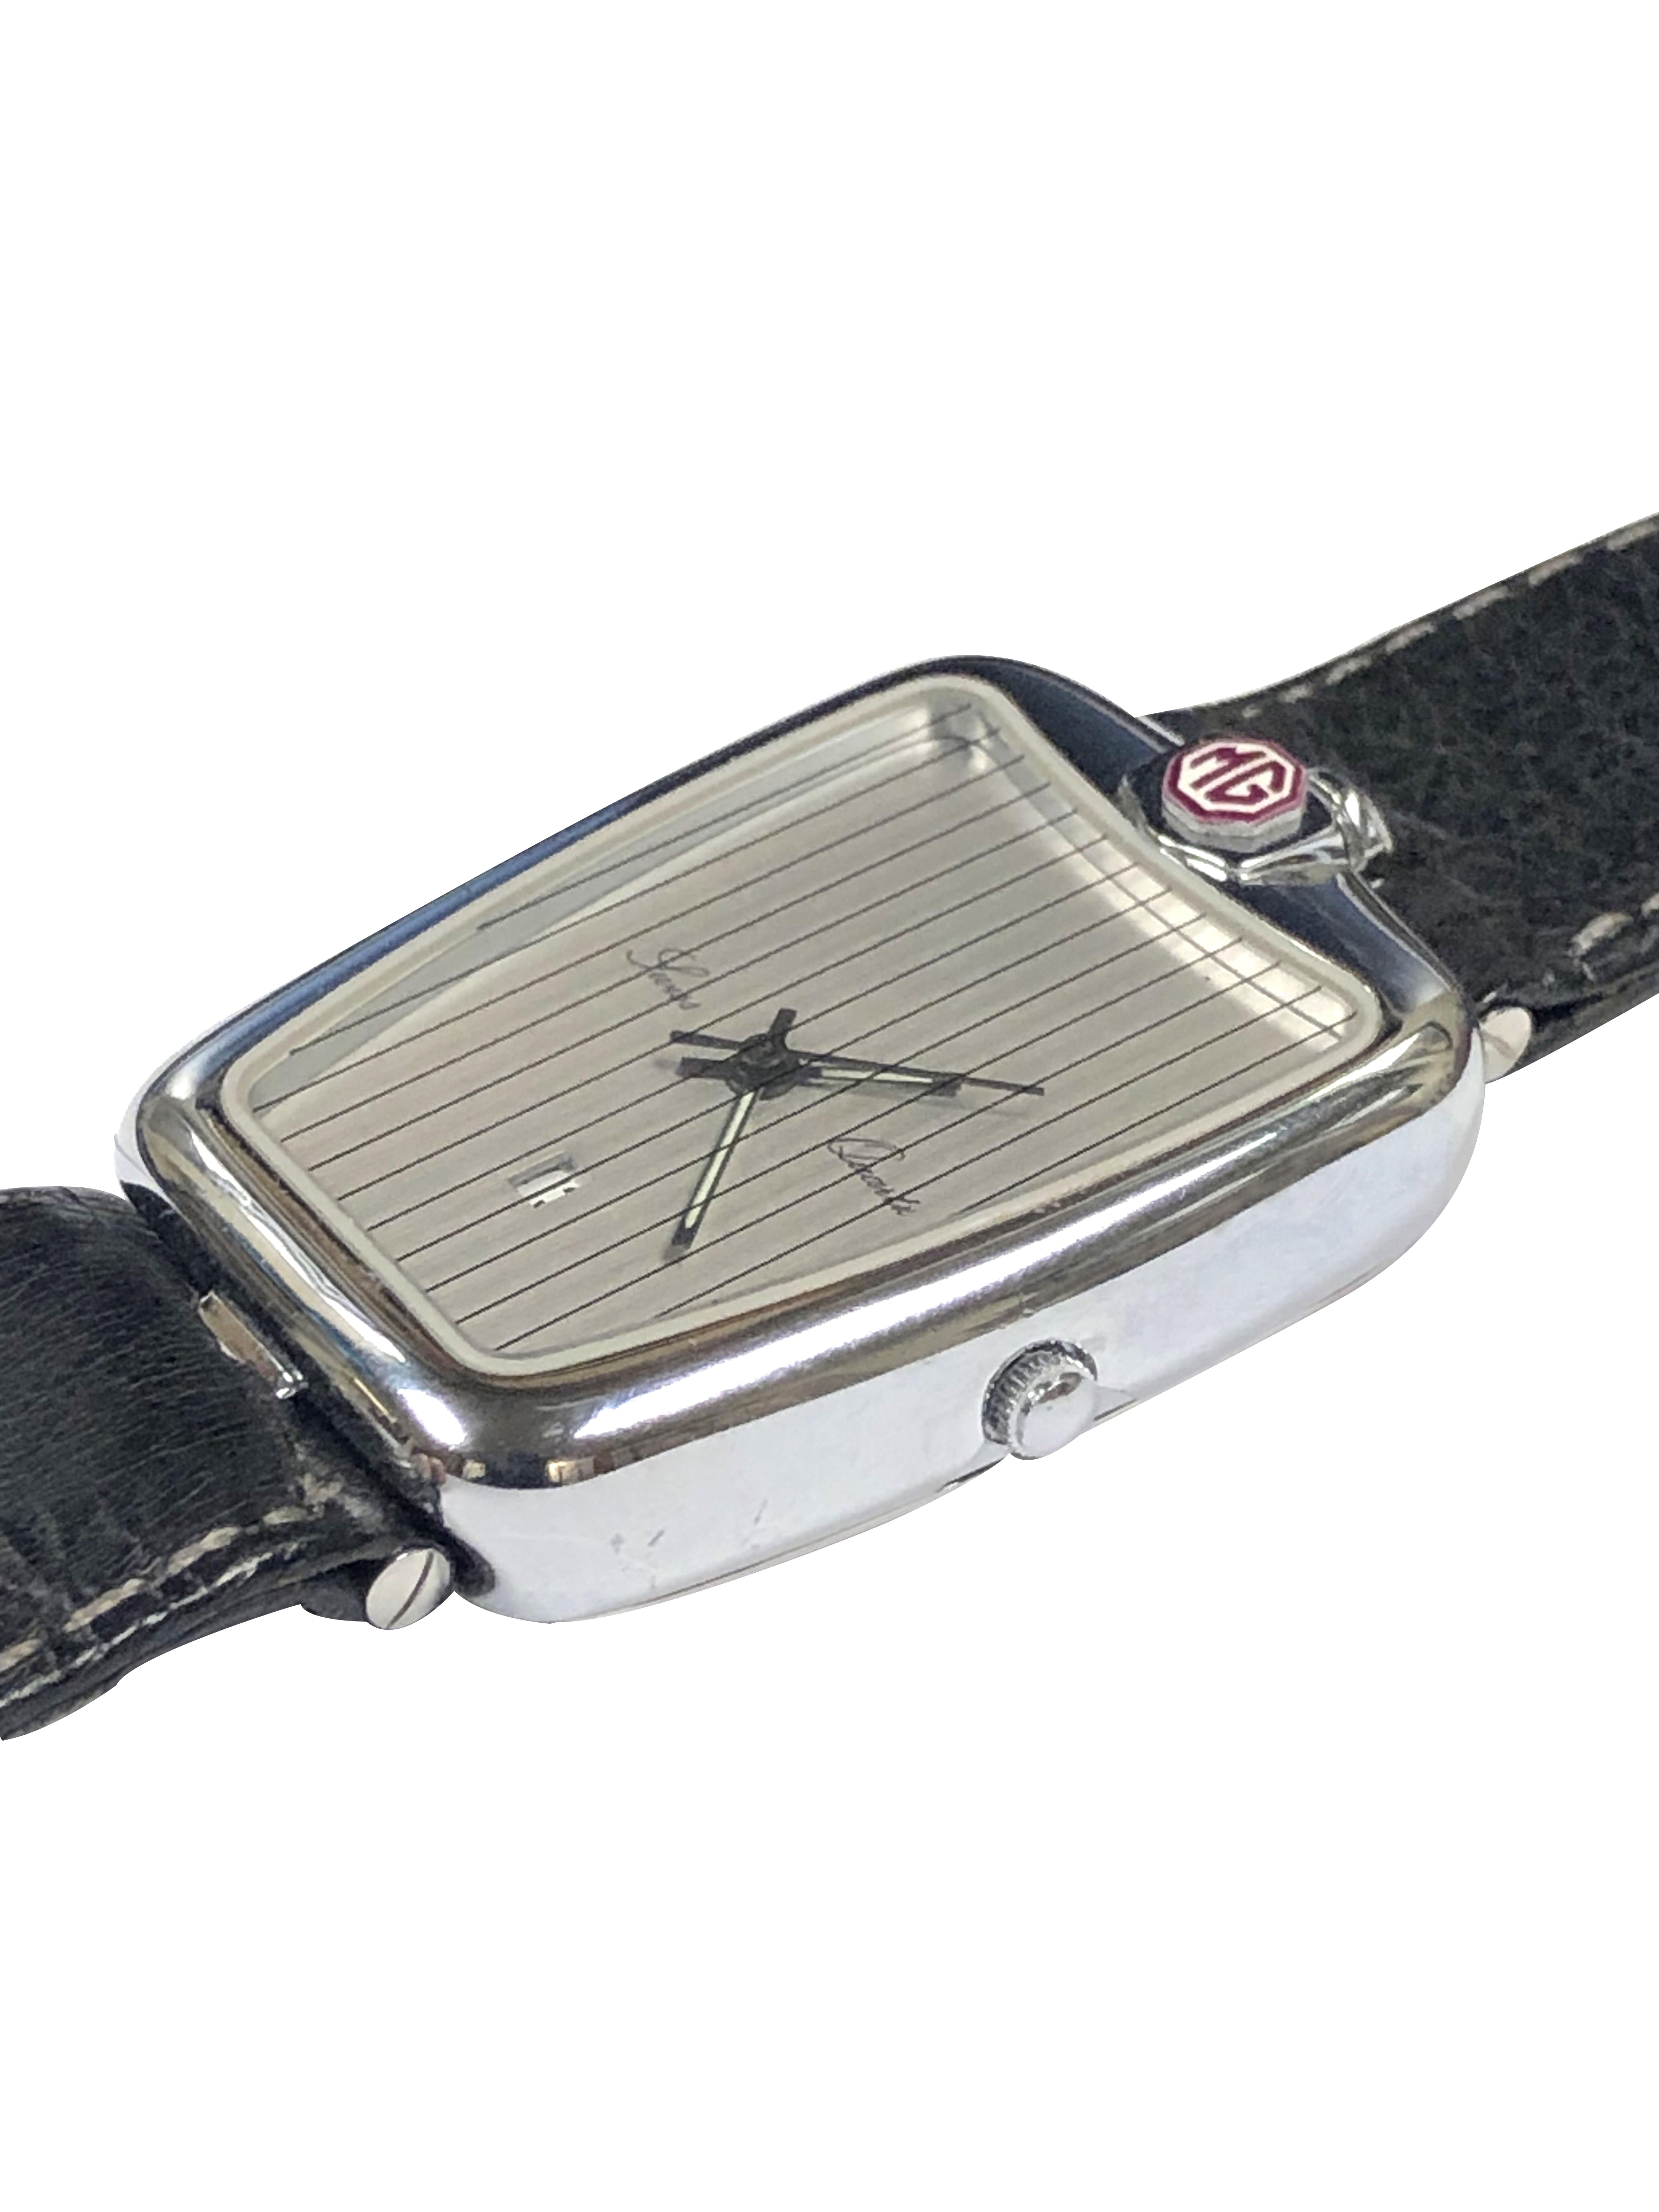 Circa 1990 M.G. Motor Car Wrist Watch, 37 X 26 M.M. Stainless Steel 2 Piece case in the form of a 1930s Grille of the Famous British automobile including an enamel MG logo at the top. Quartz Movement, Silver Dial with Calendar window at the 6